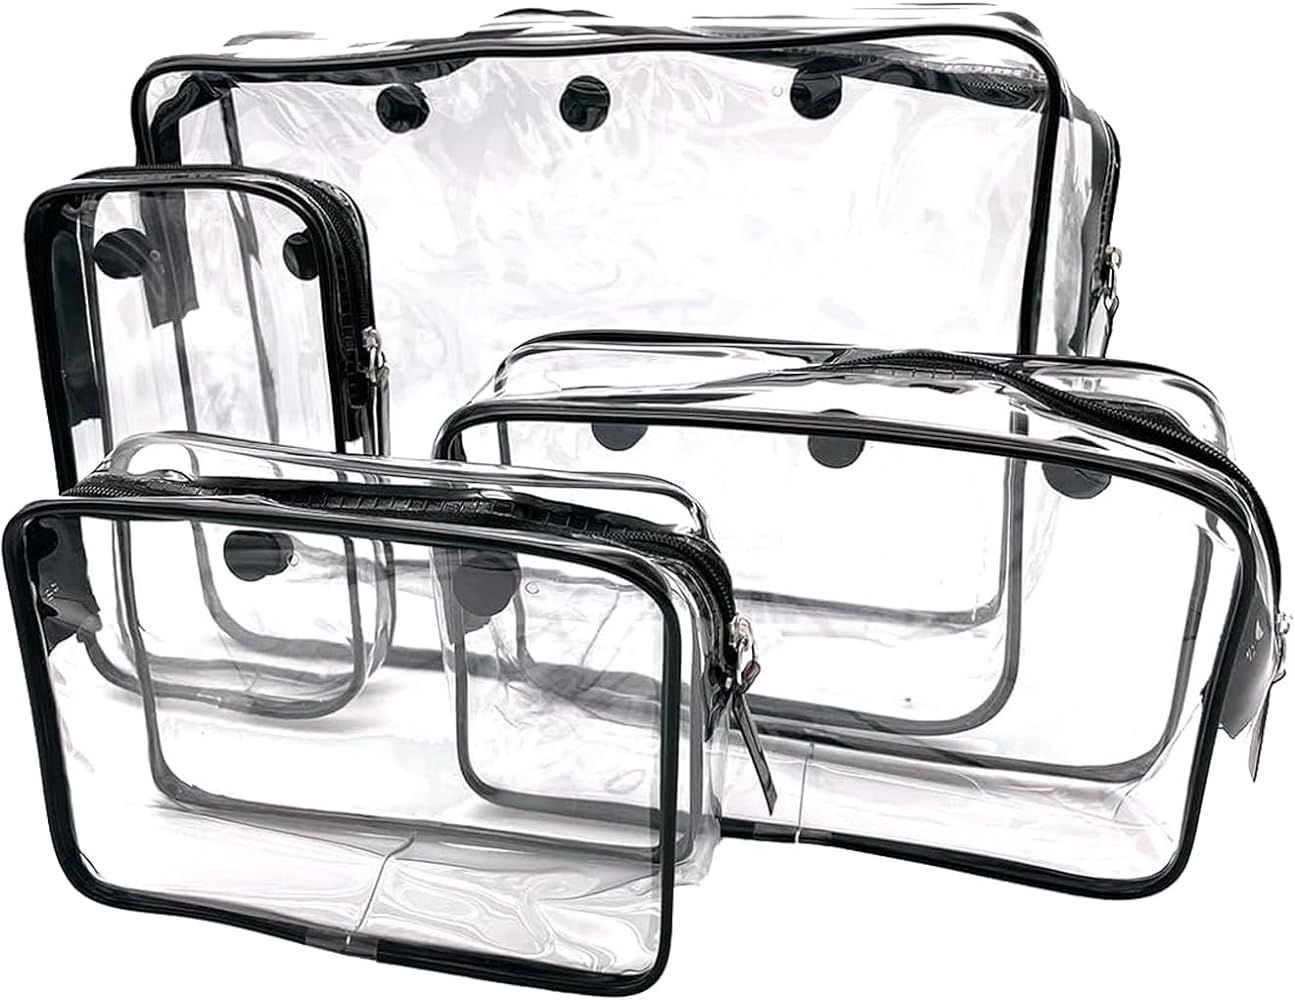 4 Pack Clear Makeup Storage Bag Beach Bag Bogg Bag Accessories whit Hooks Carabiner | Amazon (US)